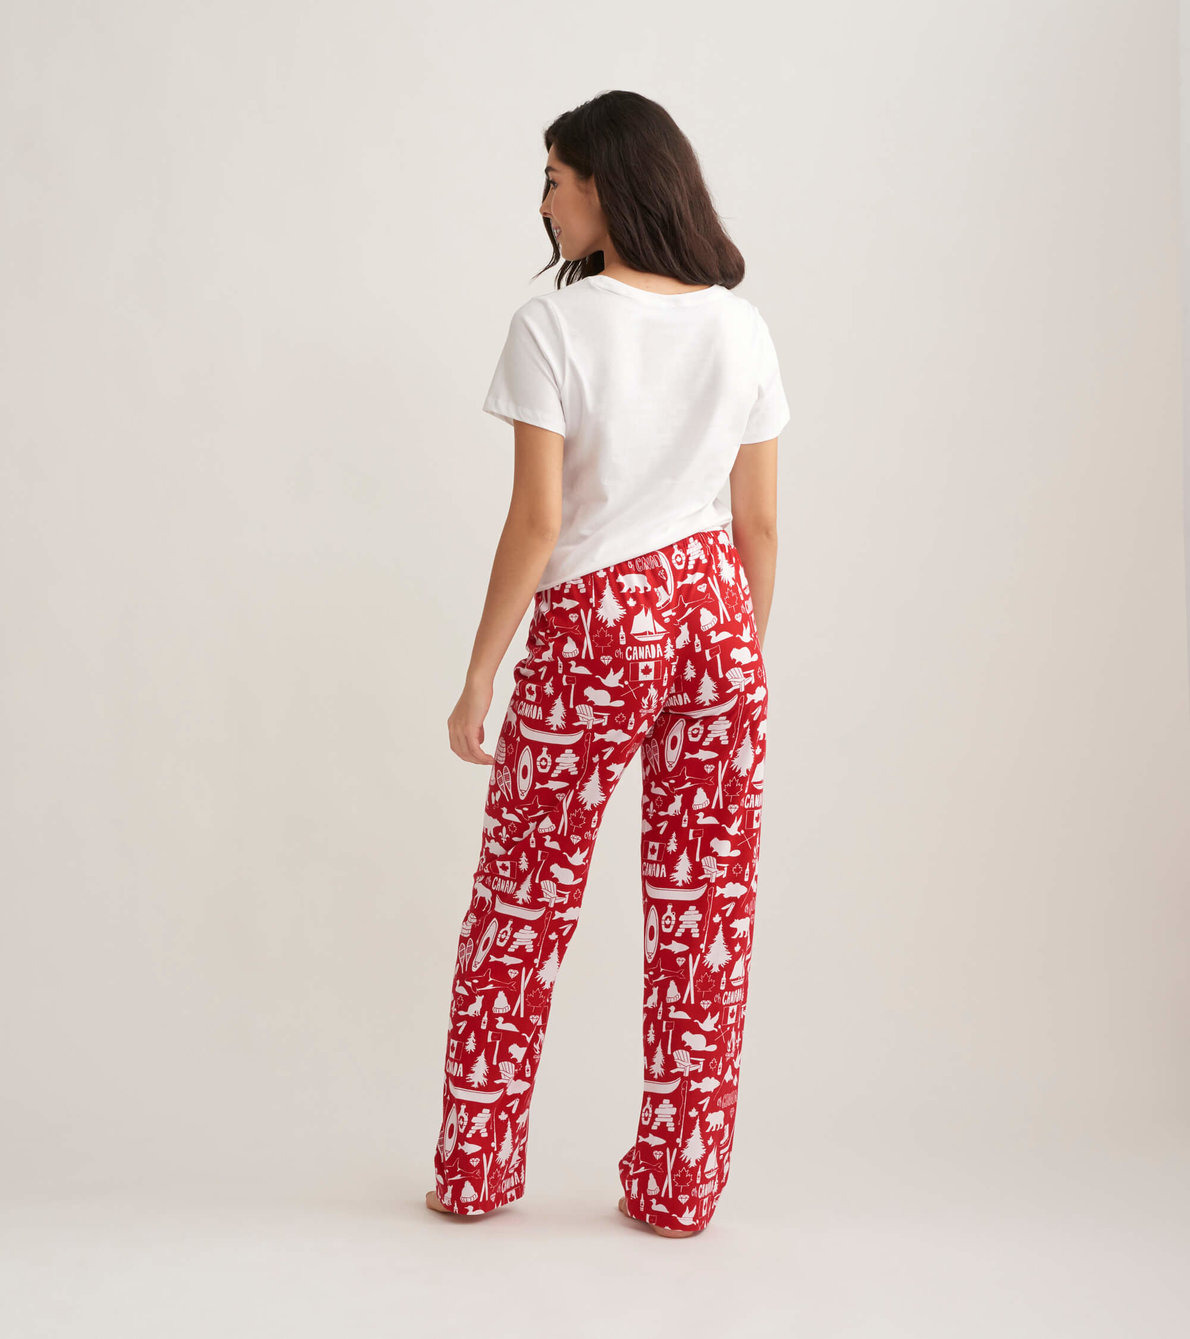 View larger image of Oh Canada Women's Tee and Pants Pajama Separates